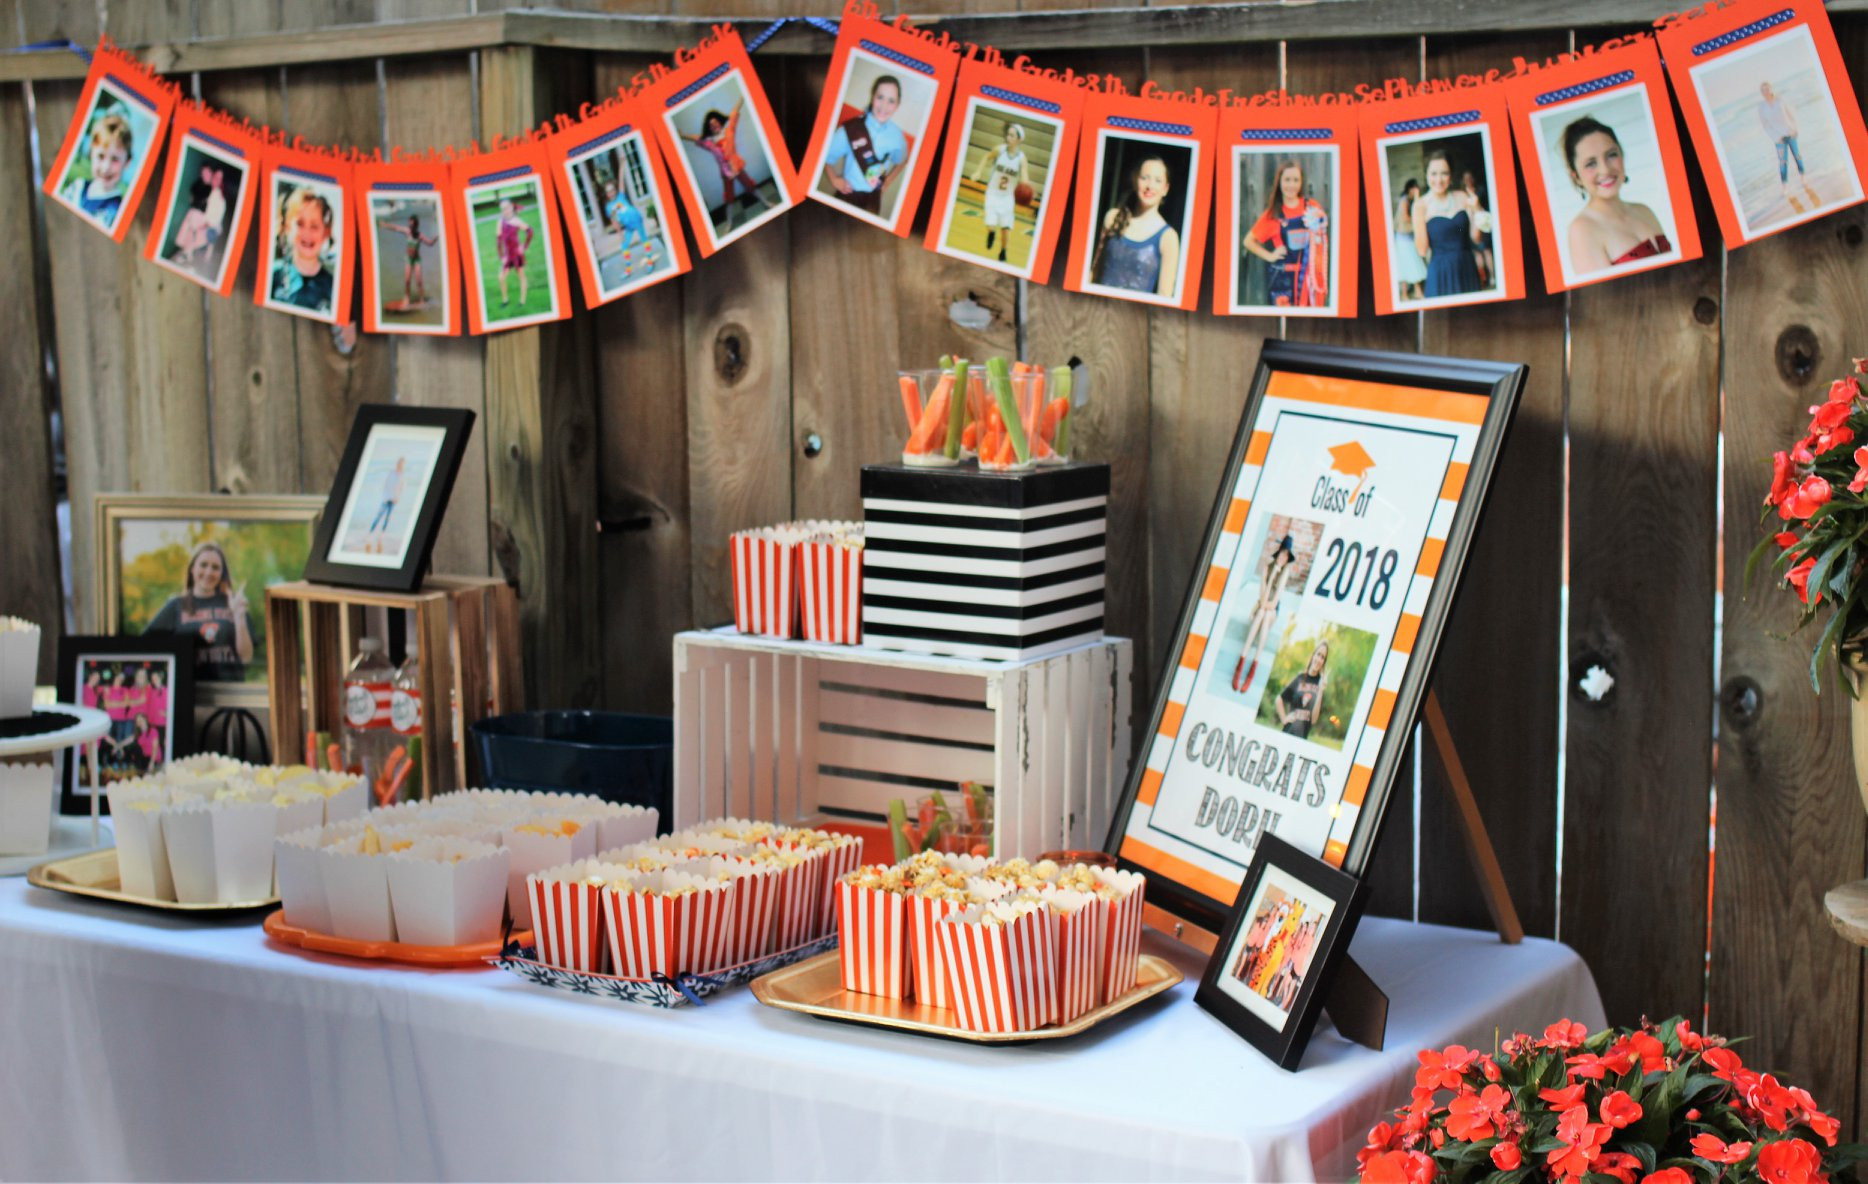 Ideas For Displaying Pictures For Graduation Party
 Graduation Party Ideas How to Celebrate Your Senior s Big Day